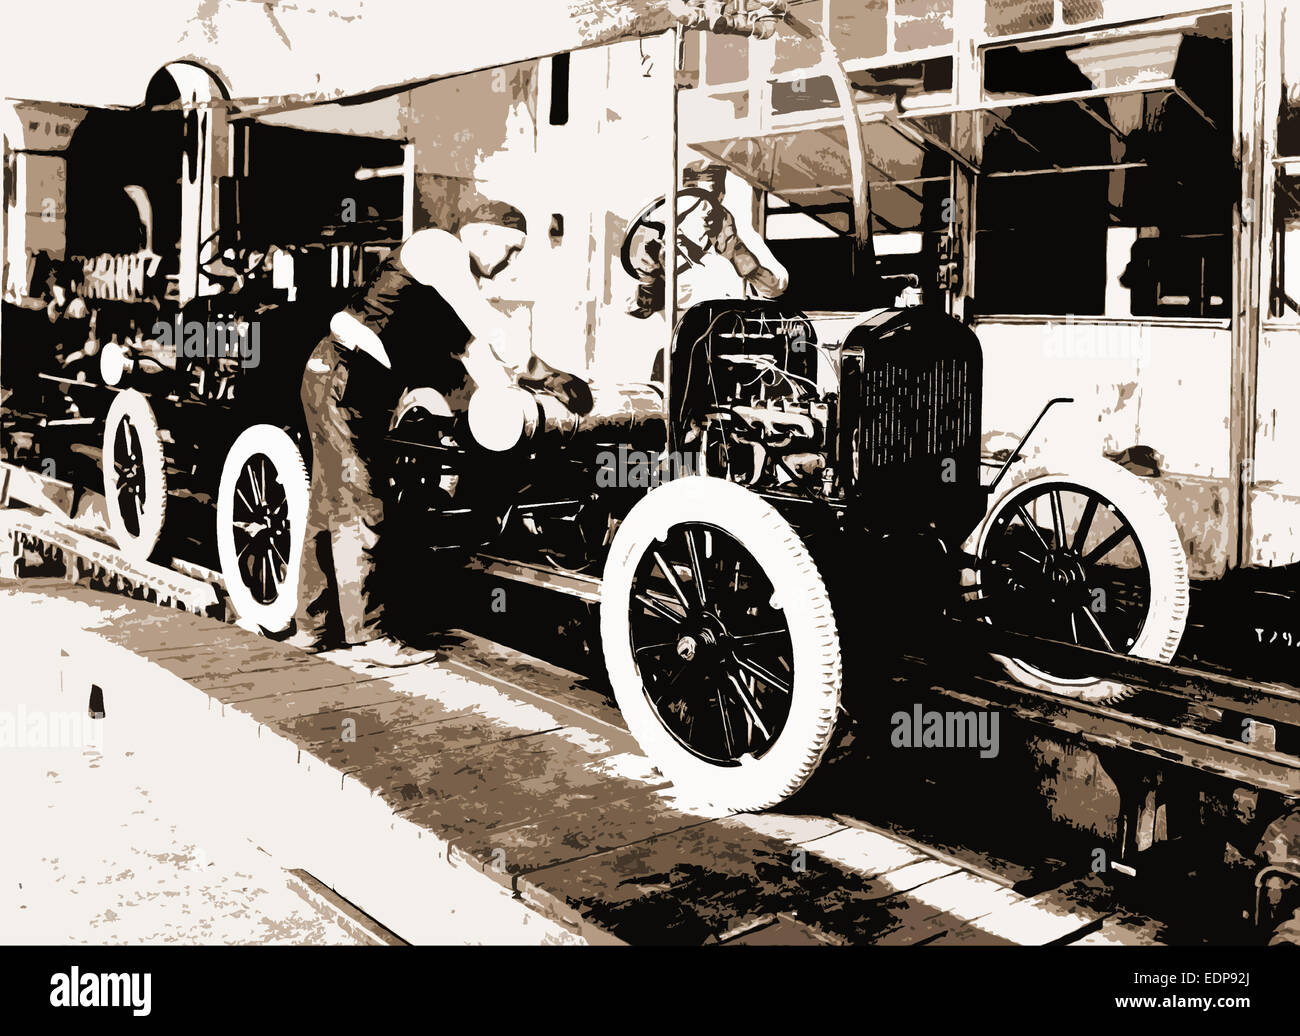 Assembly, Automobile industry, Assembly-line methods, 1923 Stock Photo